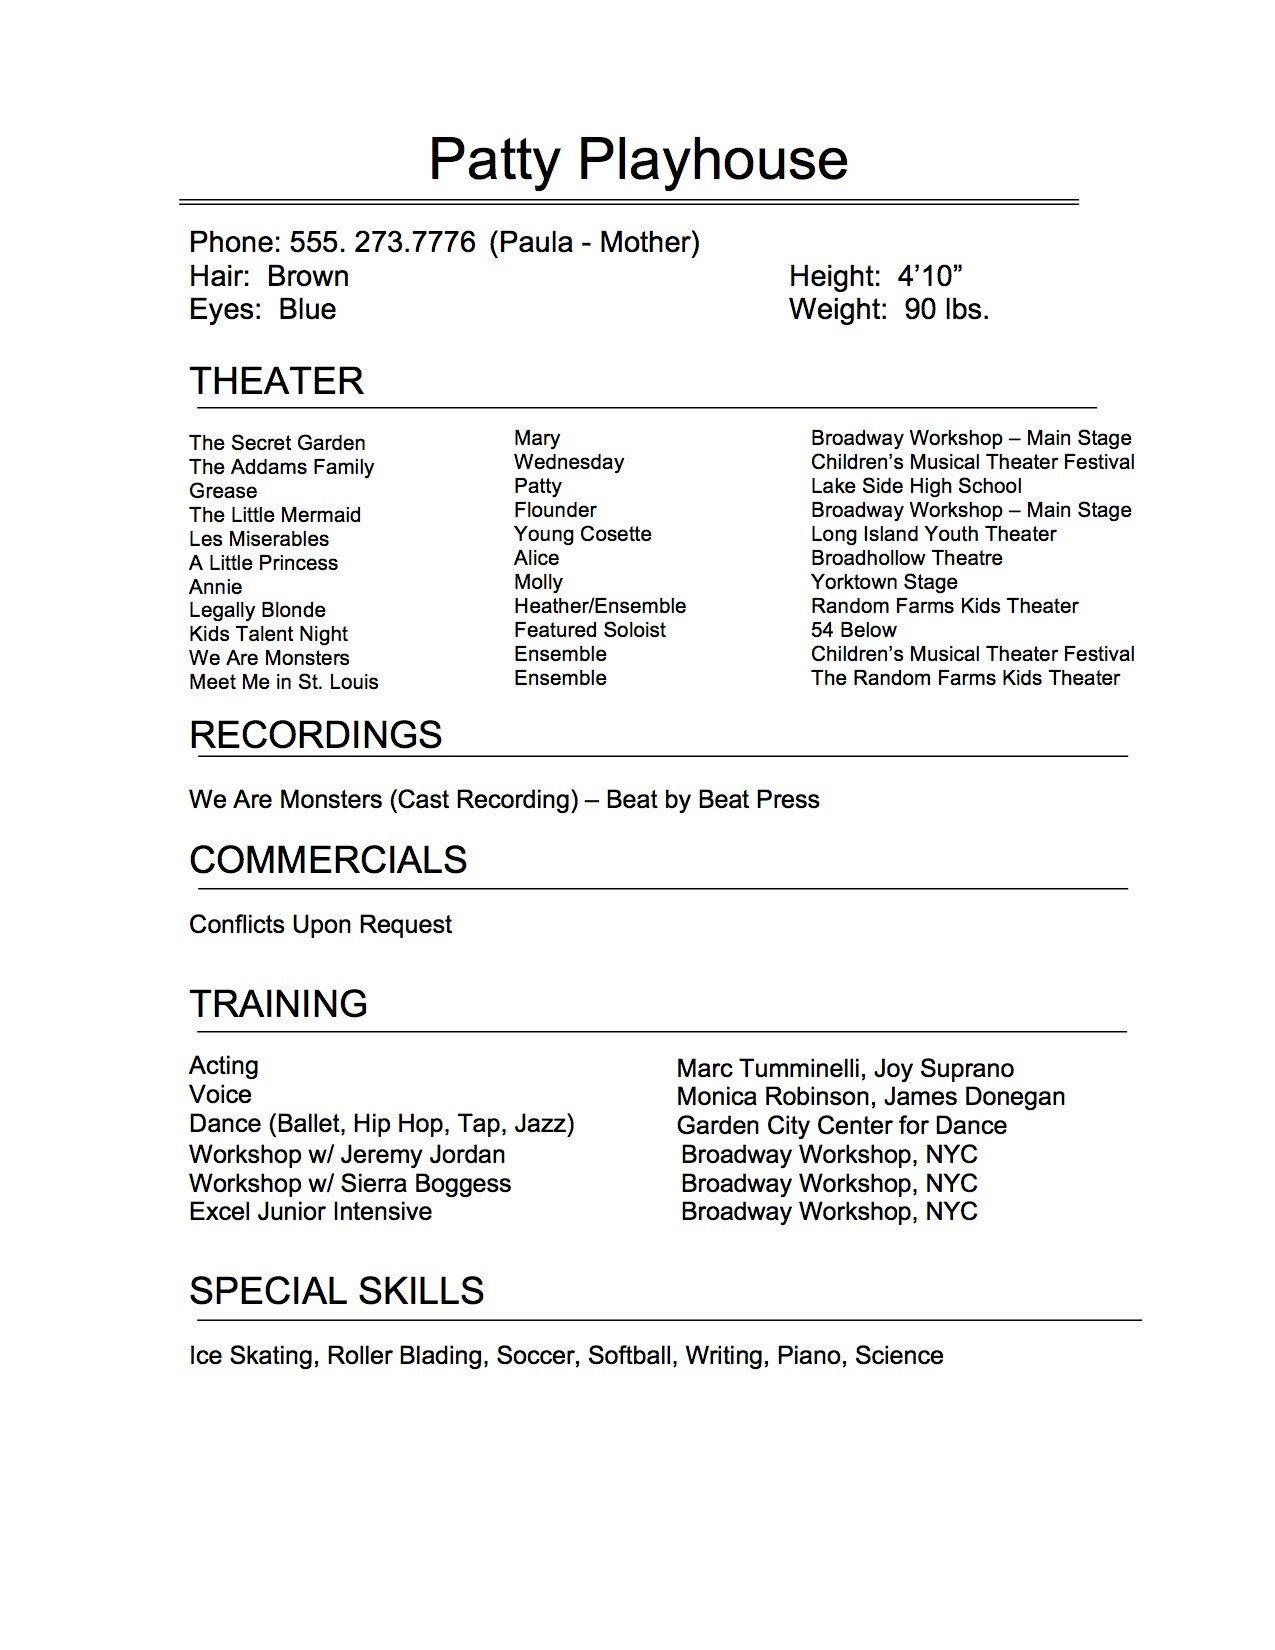 Musical theatre Resume Template the Art Of the Perfect theatrical Resume Broadway Workshop